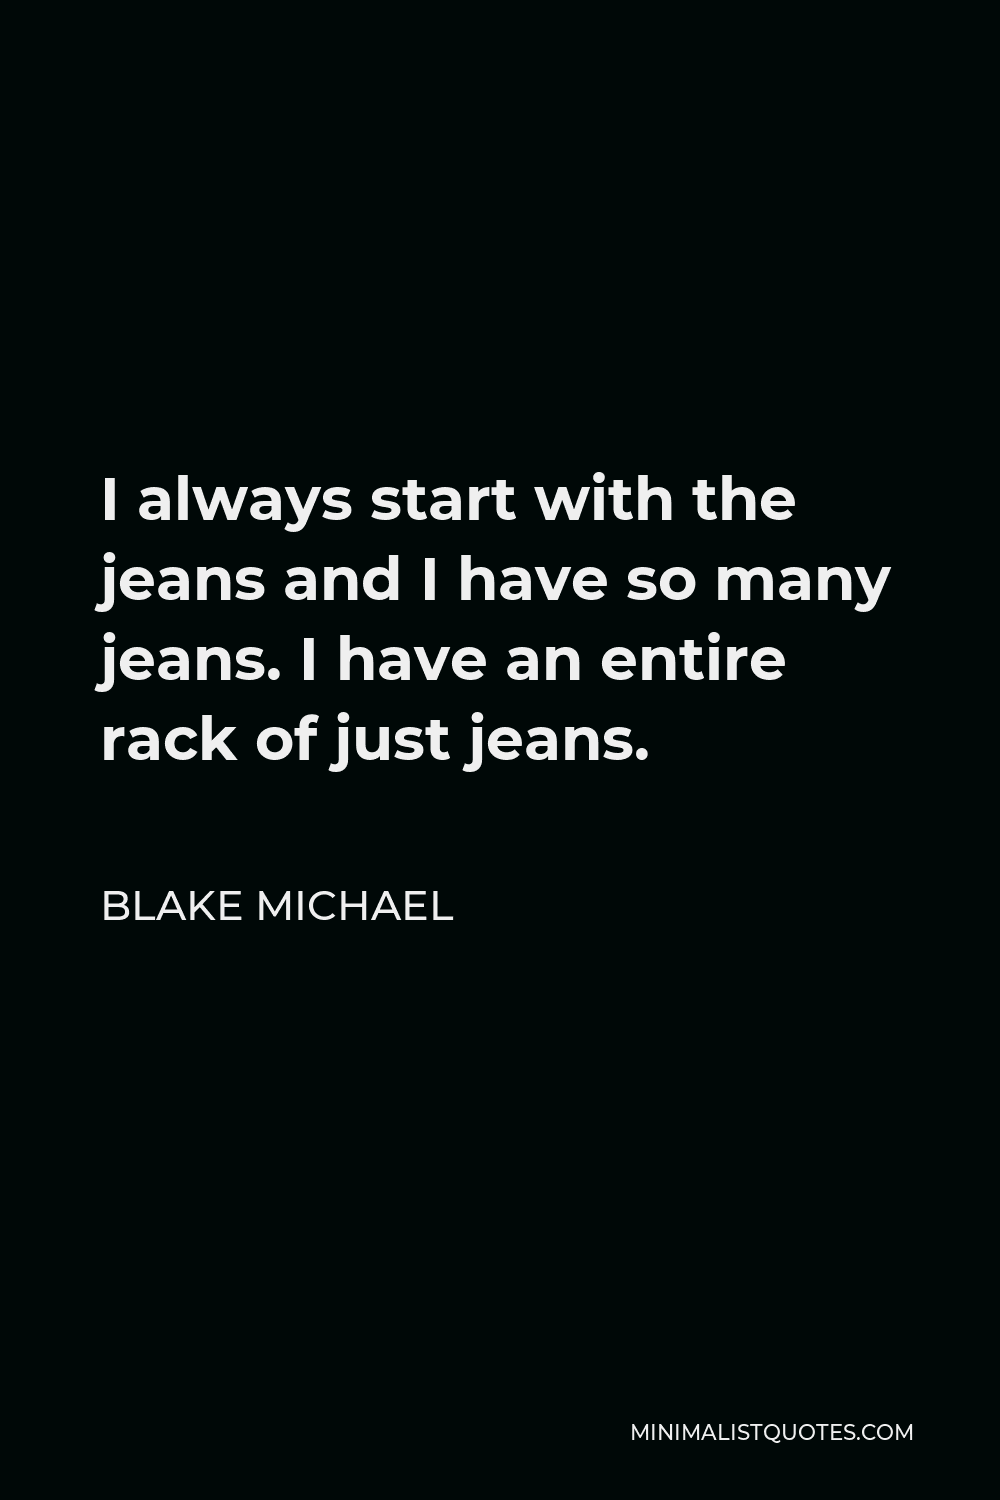 Blake Michael Quote - I always start with the jeans and I have so many jeans. I have an entire rack of just jeans.